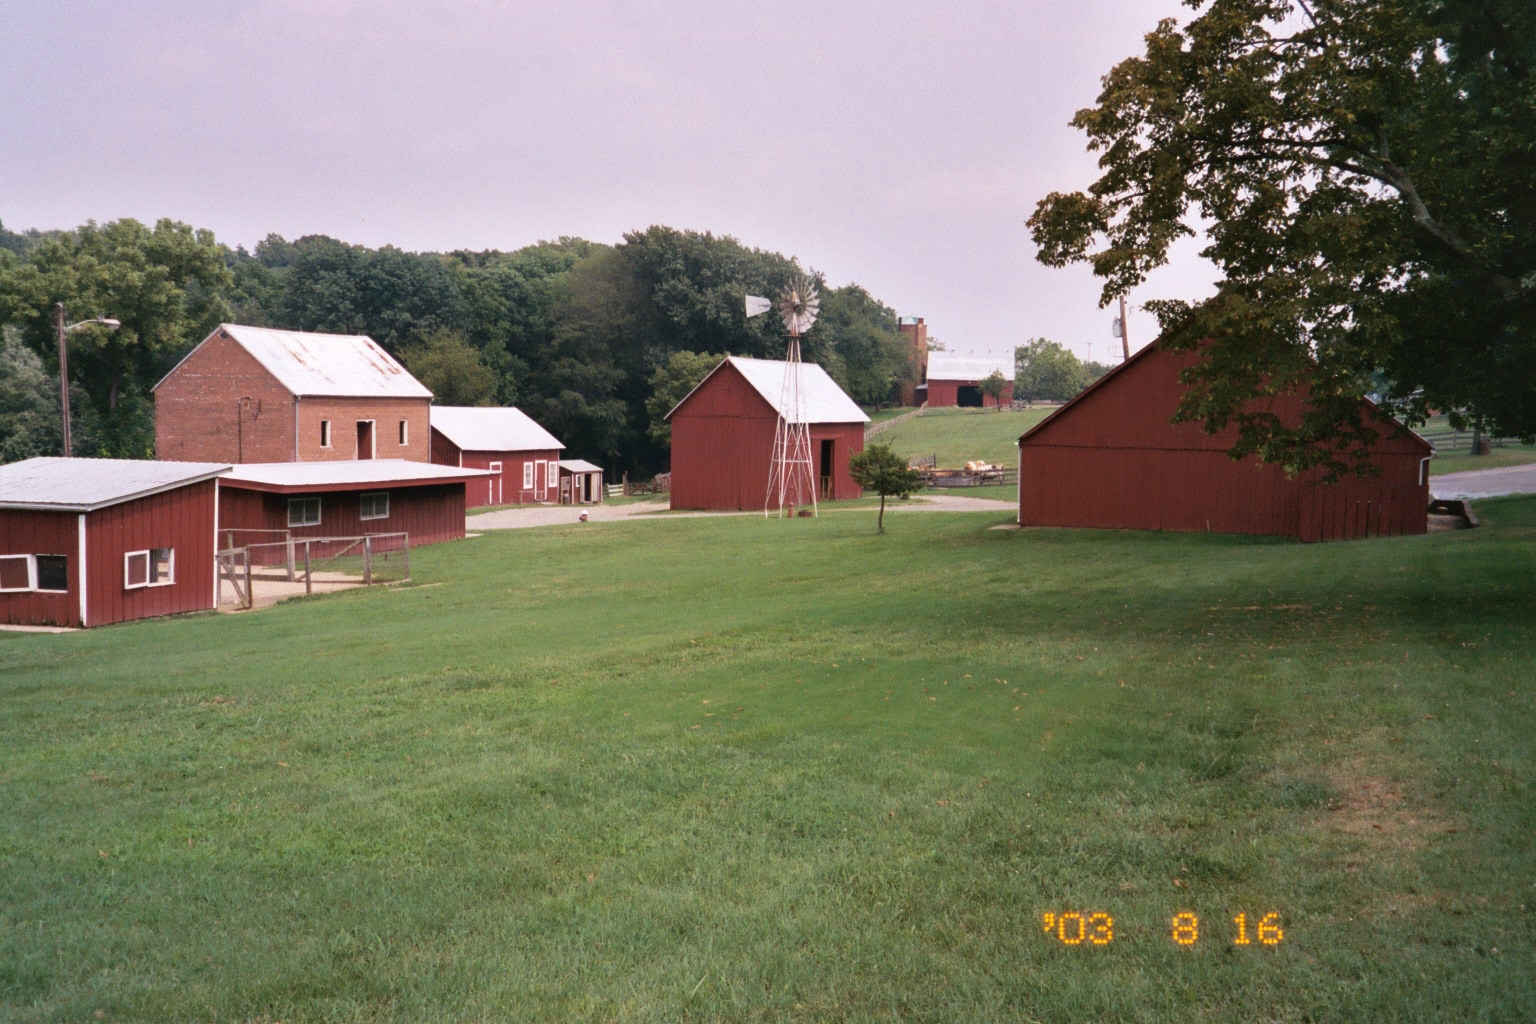 The red barns and outbuildings at Oxon Hill Farm